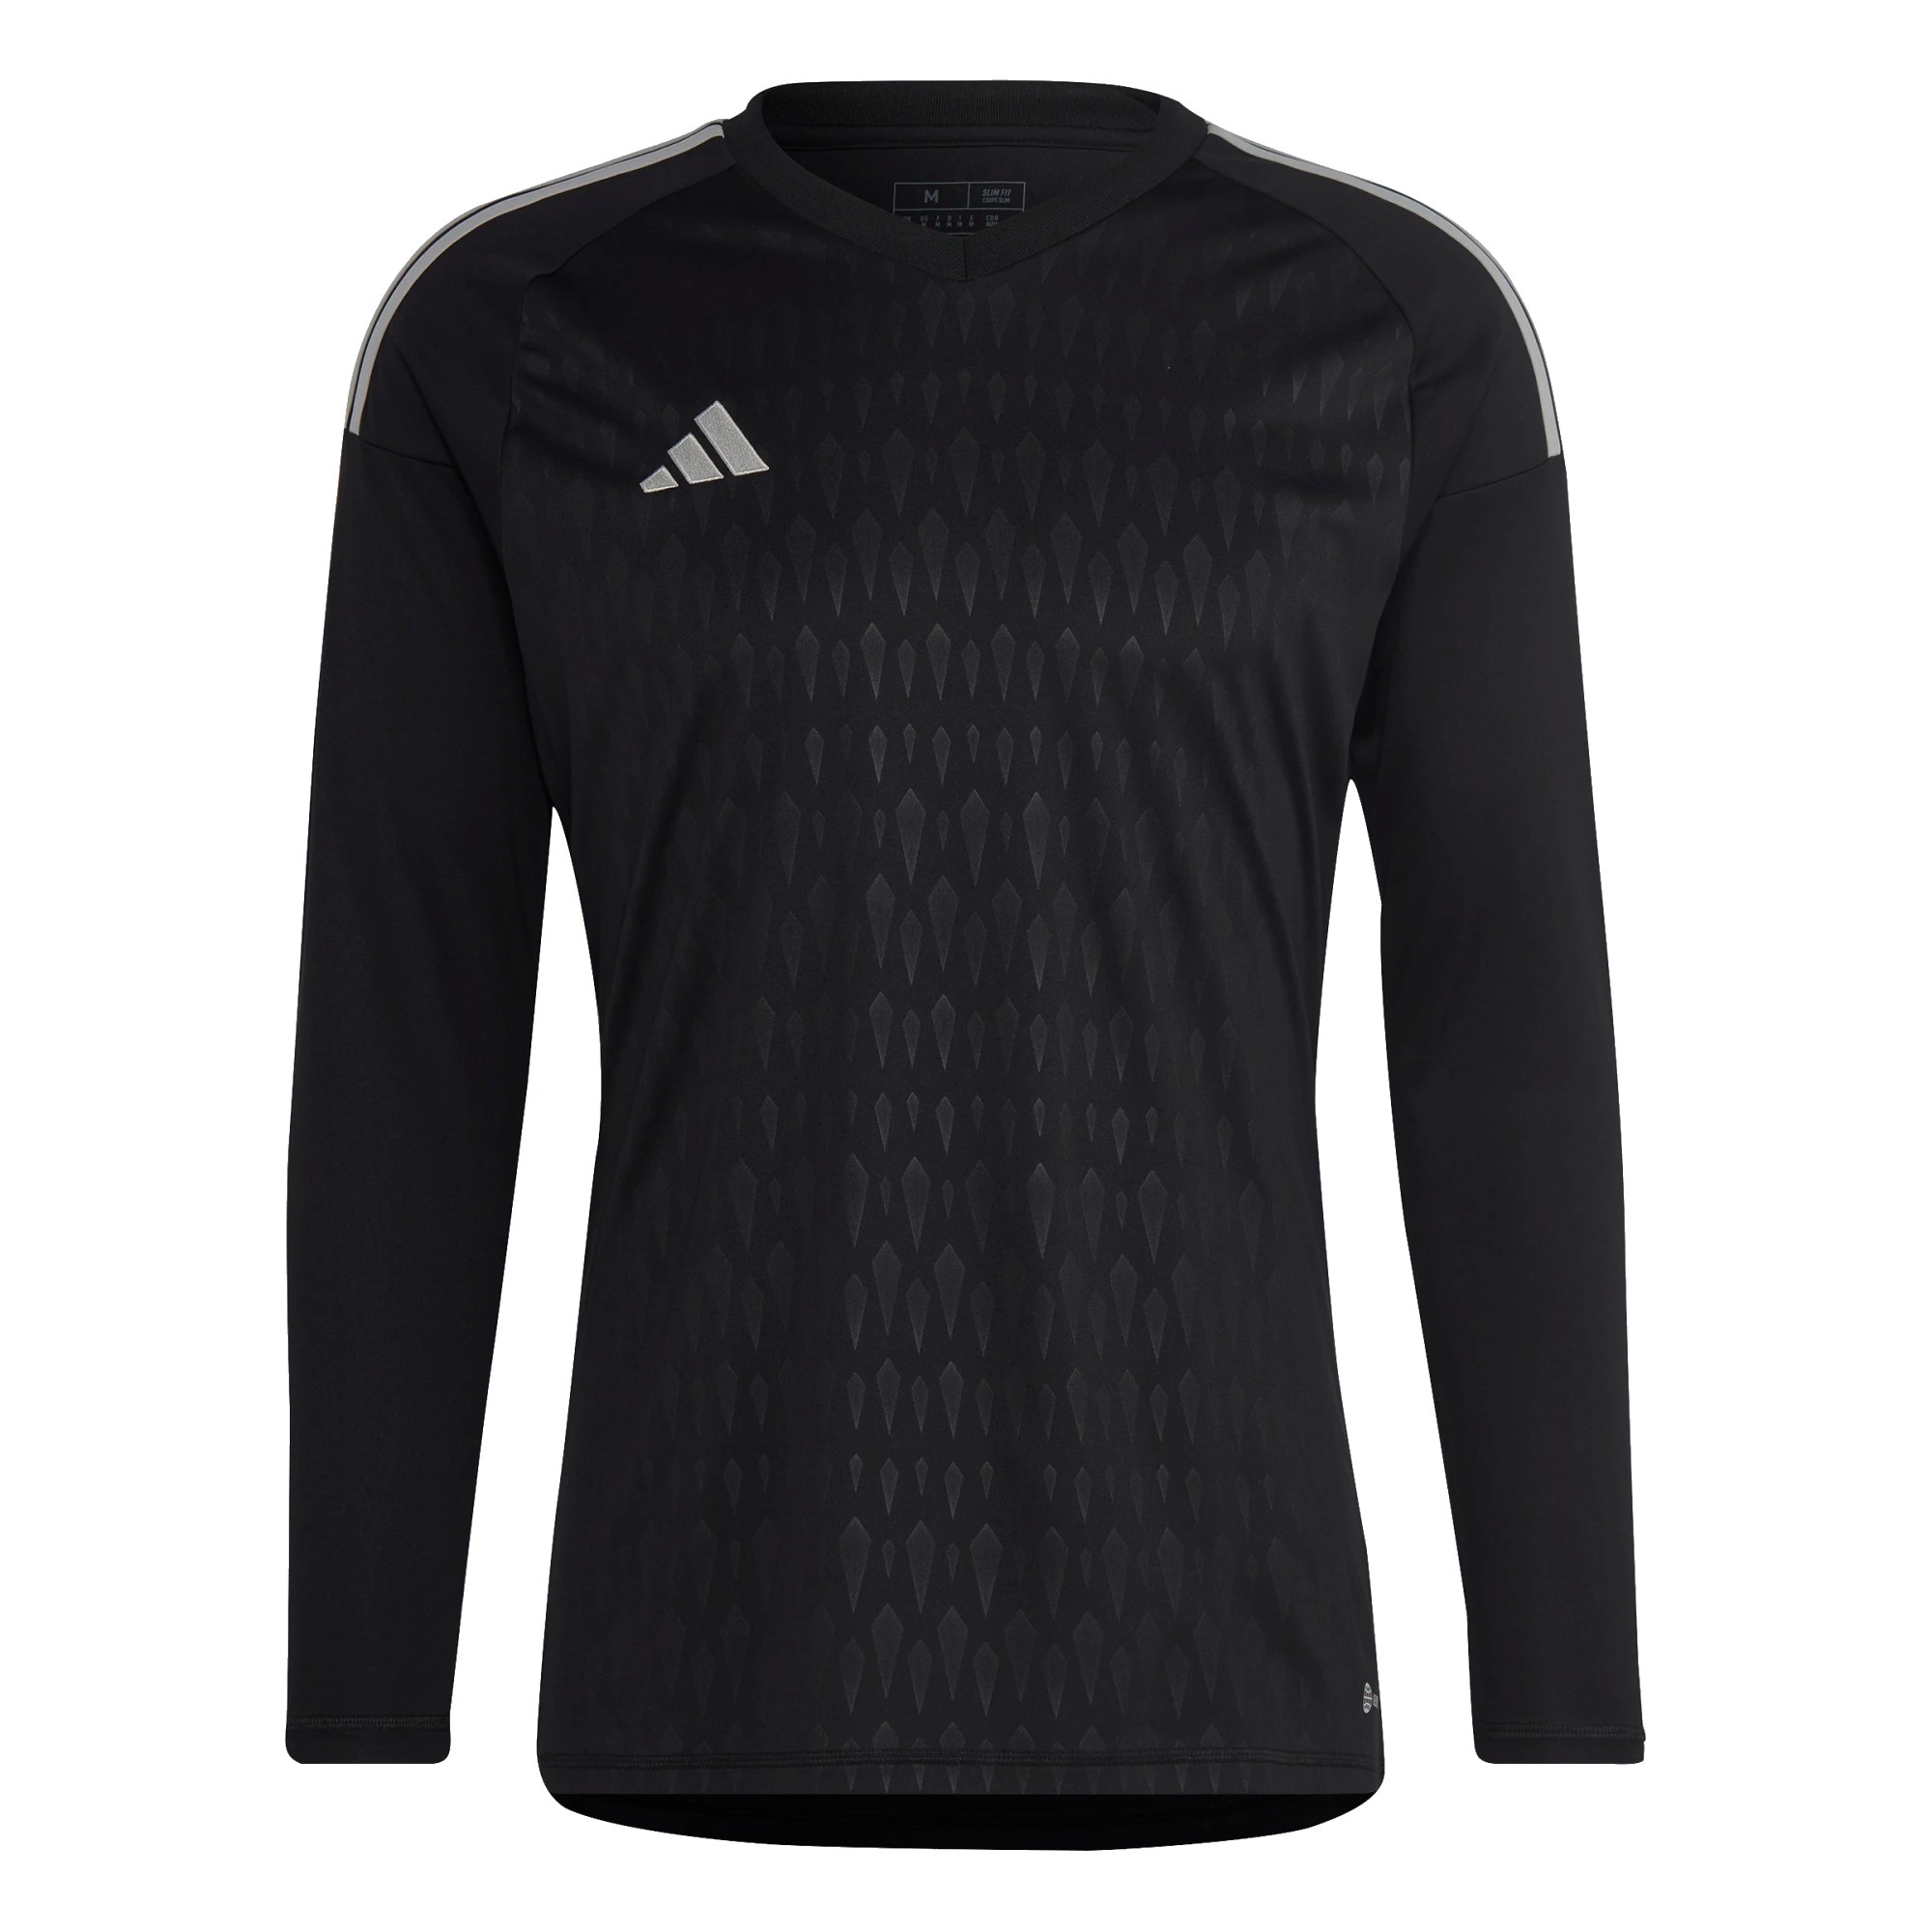 ADIDAS T23 COMPETITION GK JERSEY LS BLACK